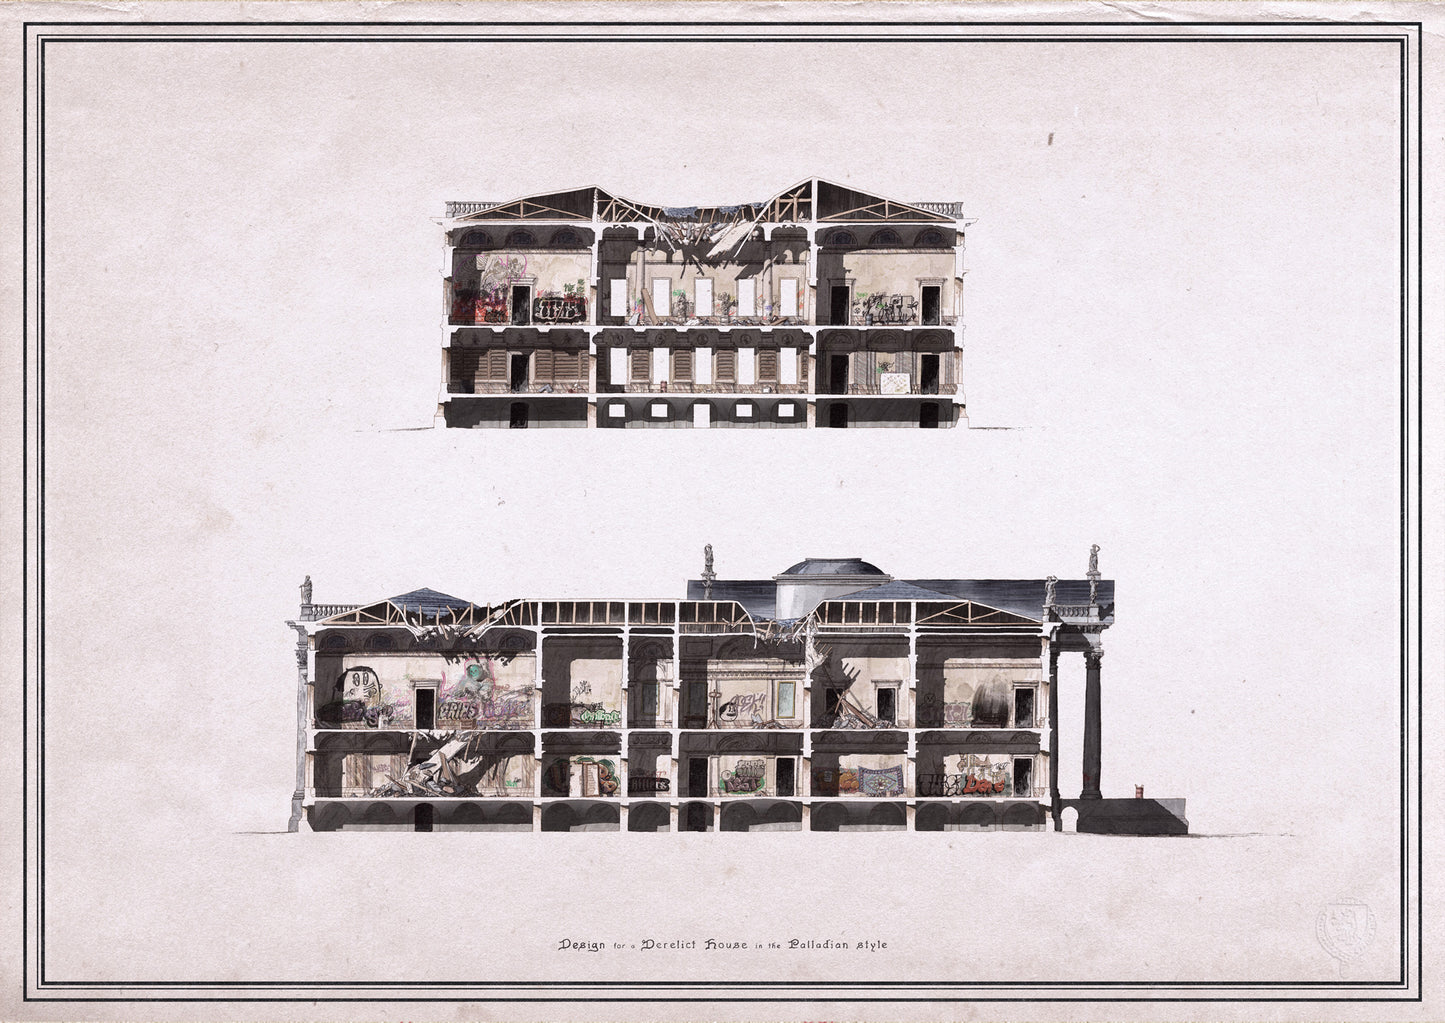 Design for a Derelict House in the Palladian Style